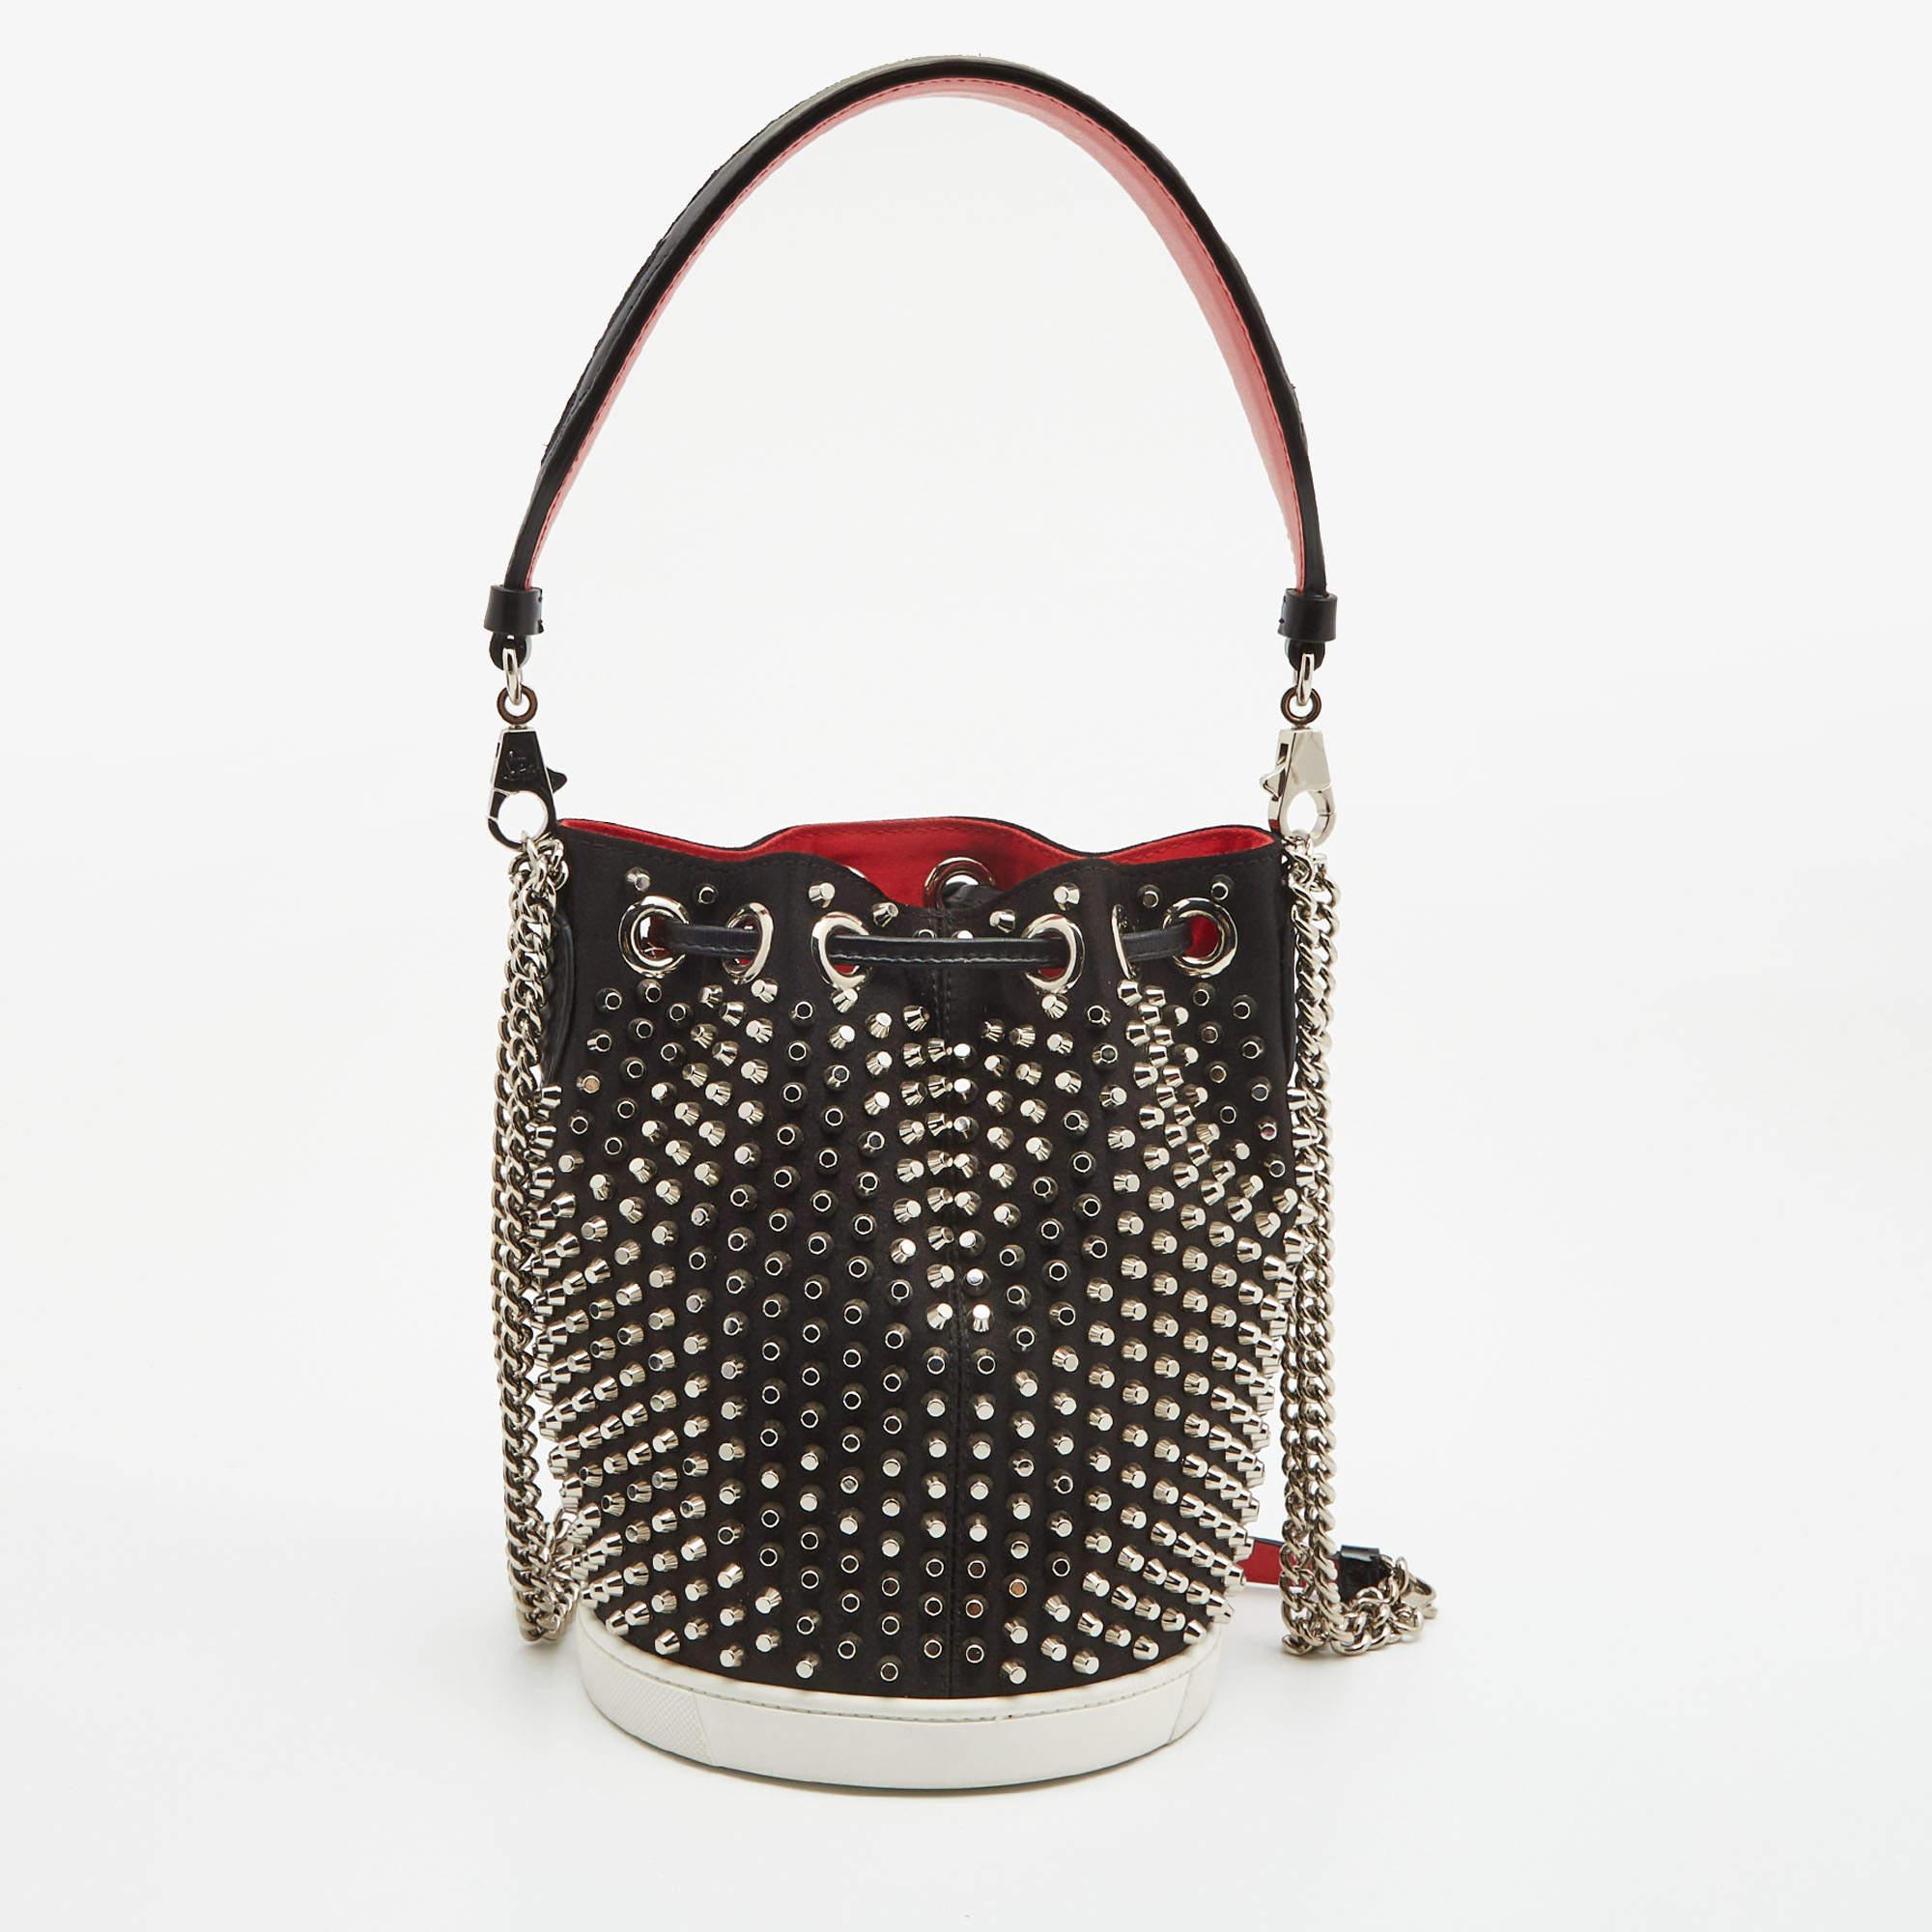 This functional bucket bag has been designed from a leather body secured with a drawstring top. It comes detailed with a shoulder strap and studs on the exterior. This bag is adorned with silver-tone hardware. Carry your everyday essentials in the